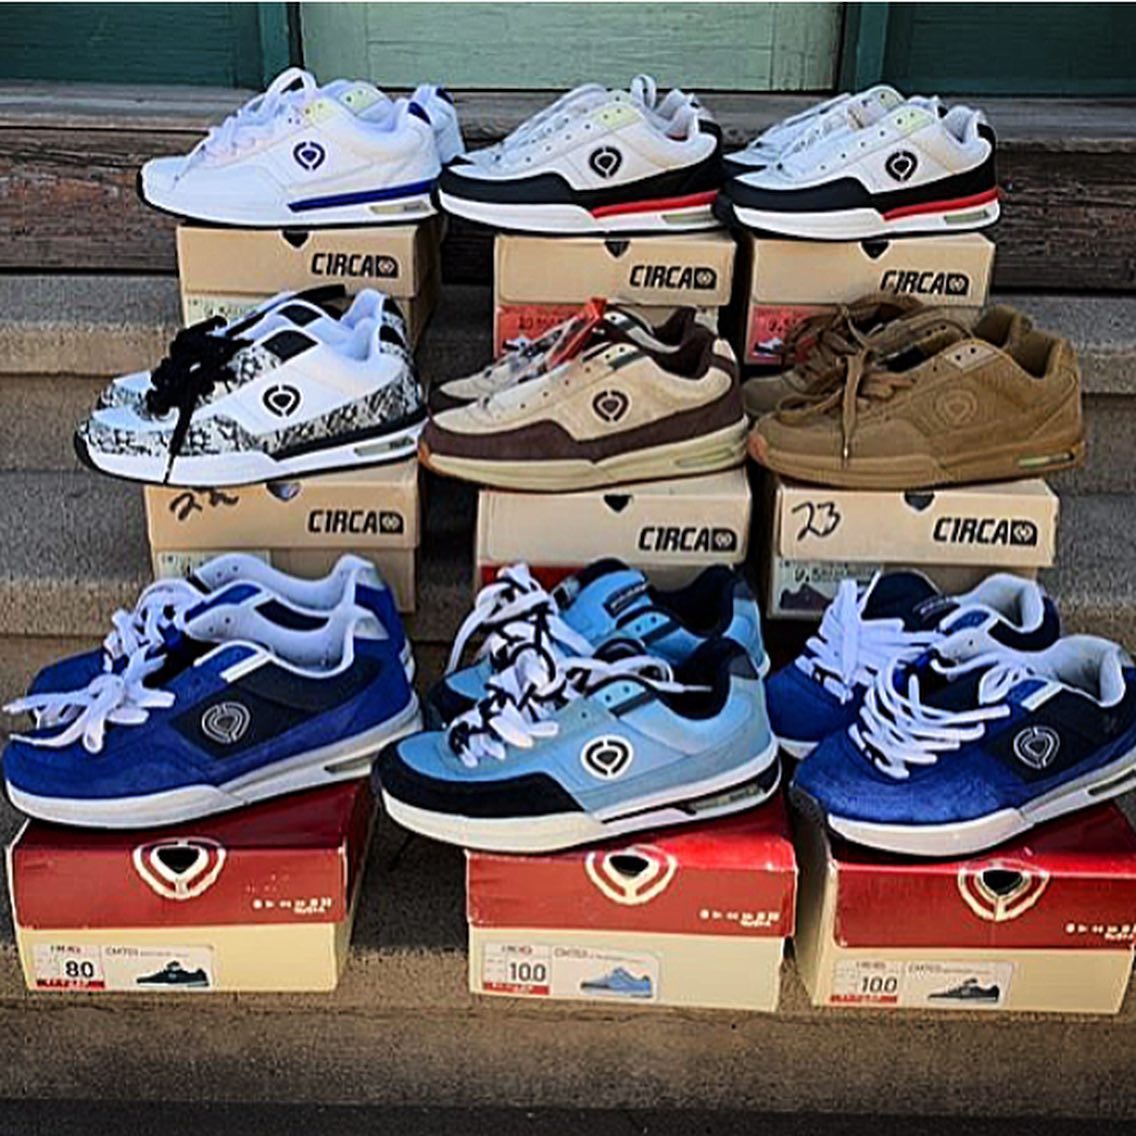 In honor of The Muska’s @thenineclub episode, here is an insane display of CM 703s.  All available for purchase. 🗣HIT UP @ethansmith_official TO COP. “At the end of the day they are just shoes, it’s just shoes, it’s just clothing, it’s just skateboards, it’s all that stuff, but obviously it’s much more than that to all of us”. - @themuska Hit the nail on the head here.  Thanks for the C H O M P and @sellingthewind  shoutouts Legend and thanks for all you’ve done and continue to do!  #sk8shoewars #muska #c1rcafootwear #skateboarding